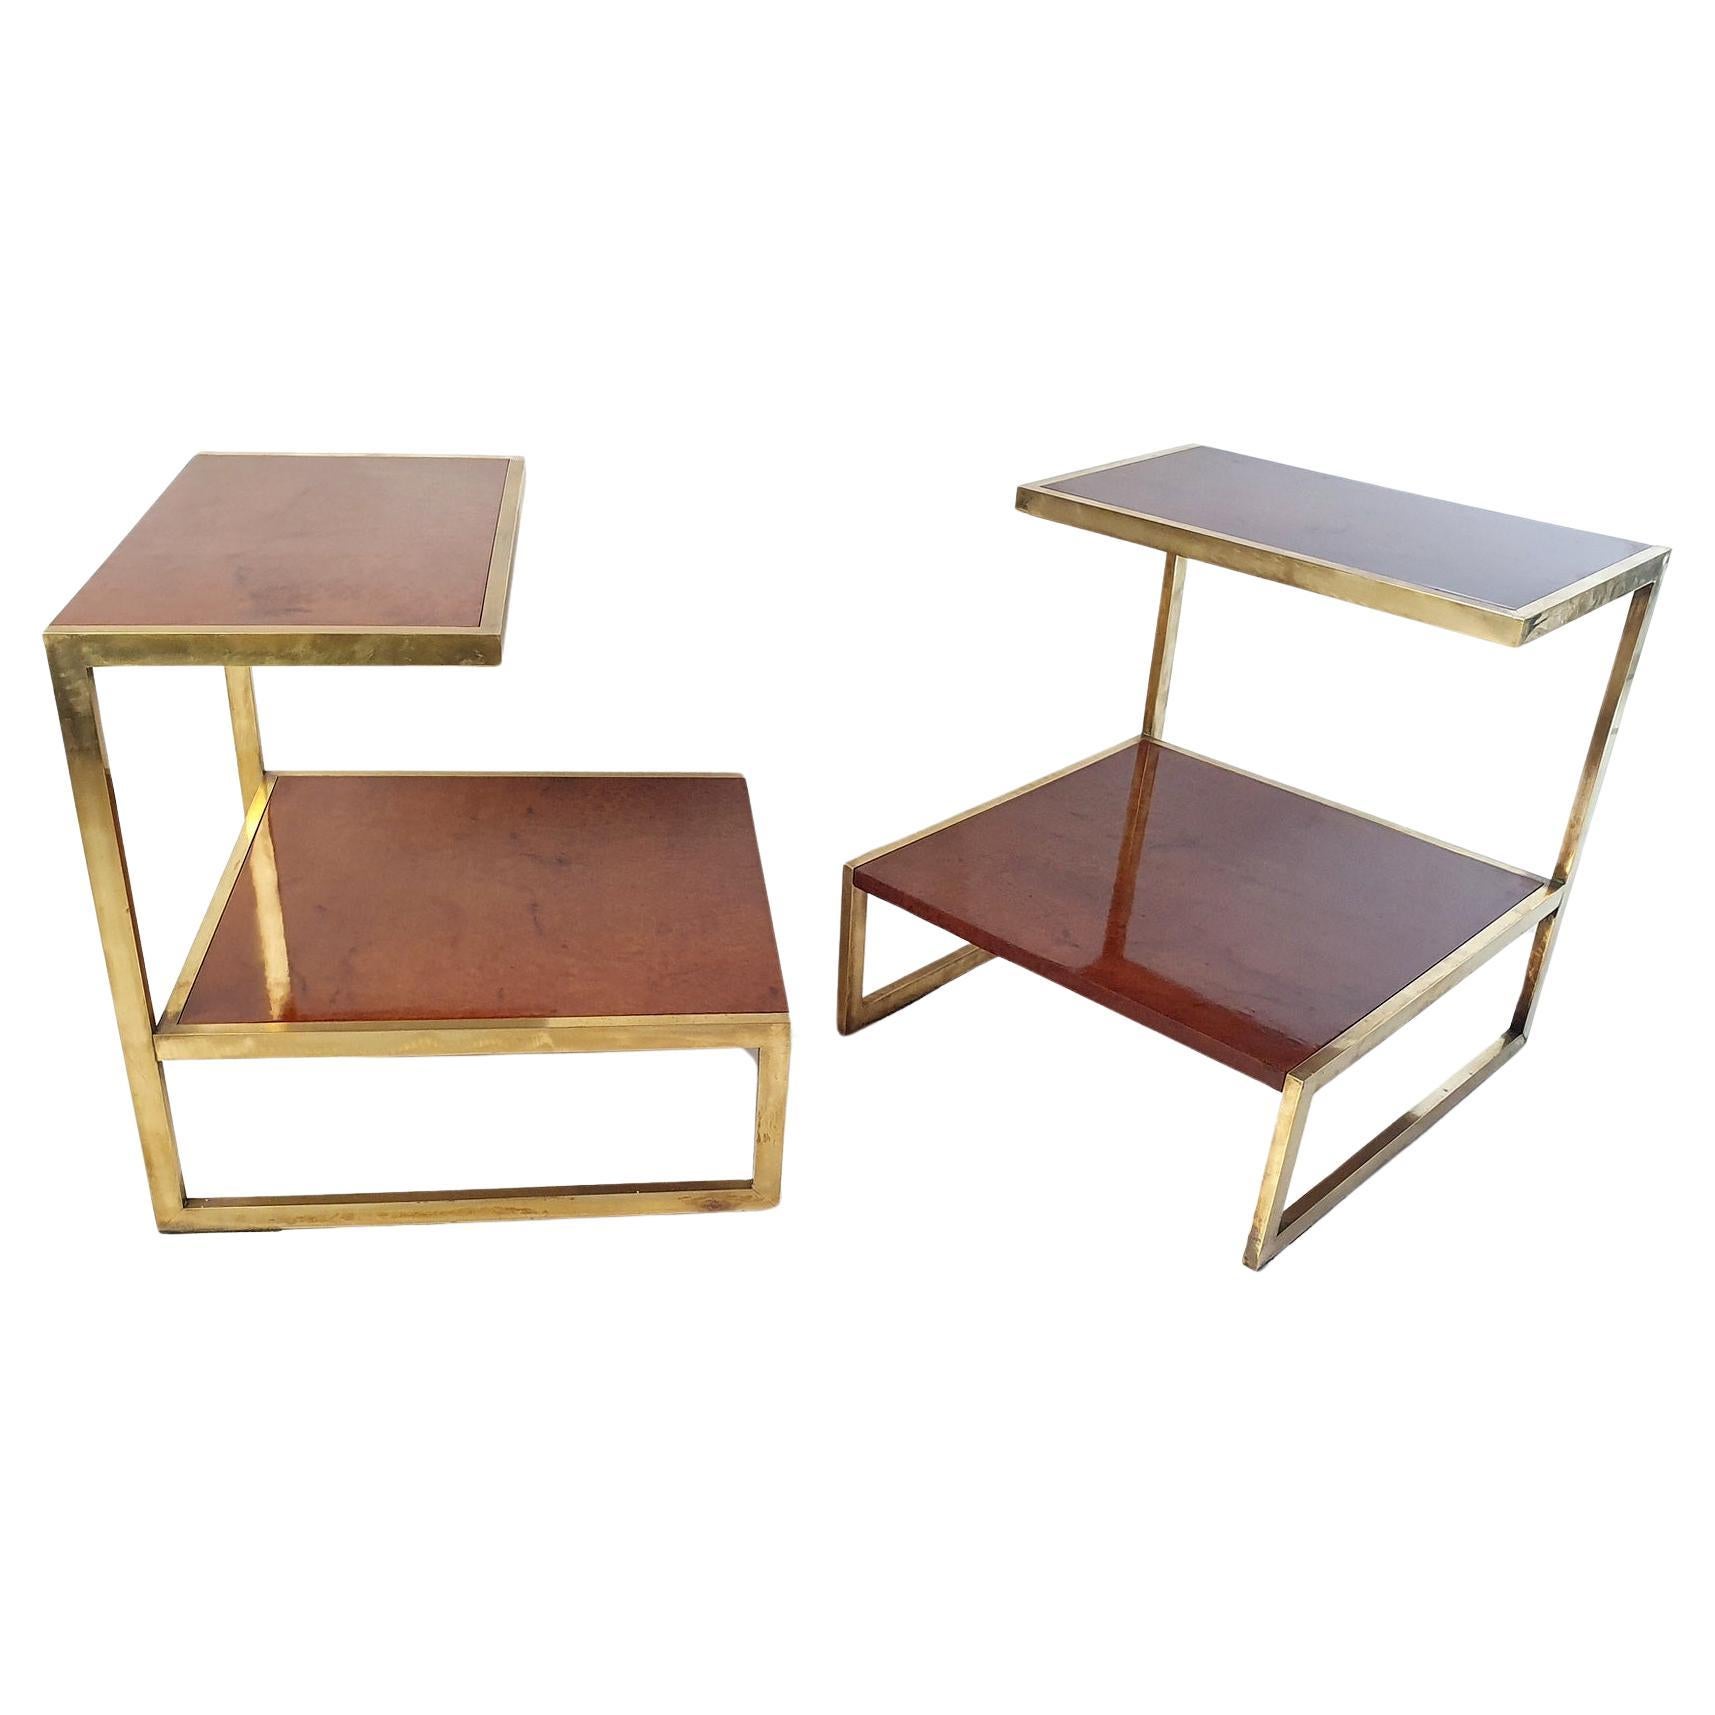 An elegant pair of Italian vintage side tables in brass and burl in the manner of Willy Rizzo Italy. Will work as end tables or bedside tables. The tables has solid frames in brass with inlaid burl shelves on both levels. 